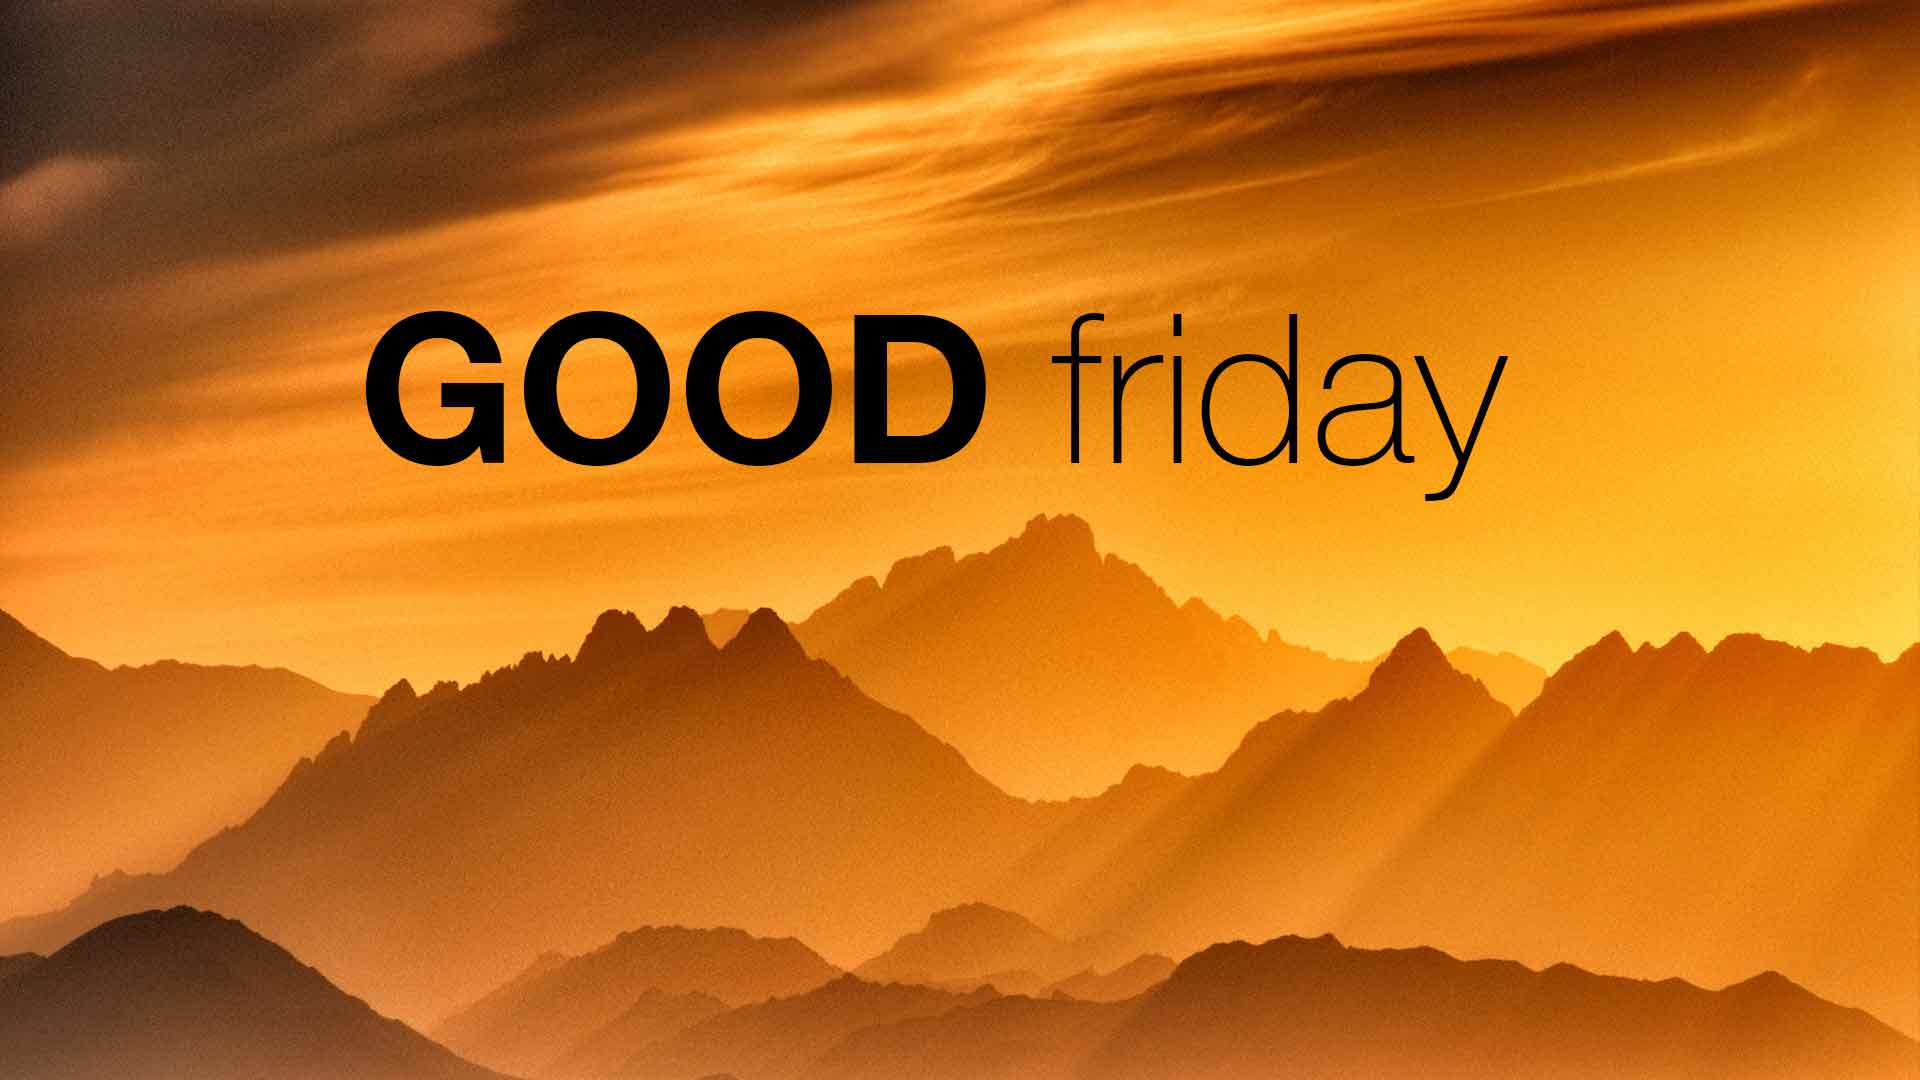 Good Friday Pictures HD Wallpapers 2019 - Good Friday New ...